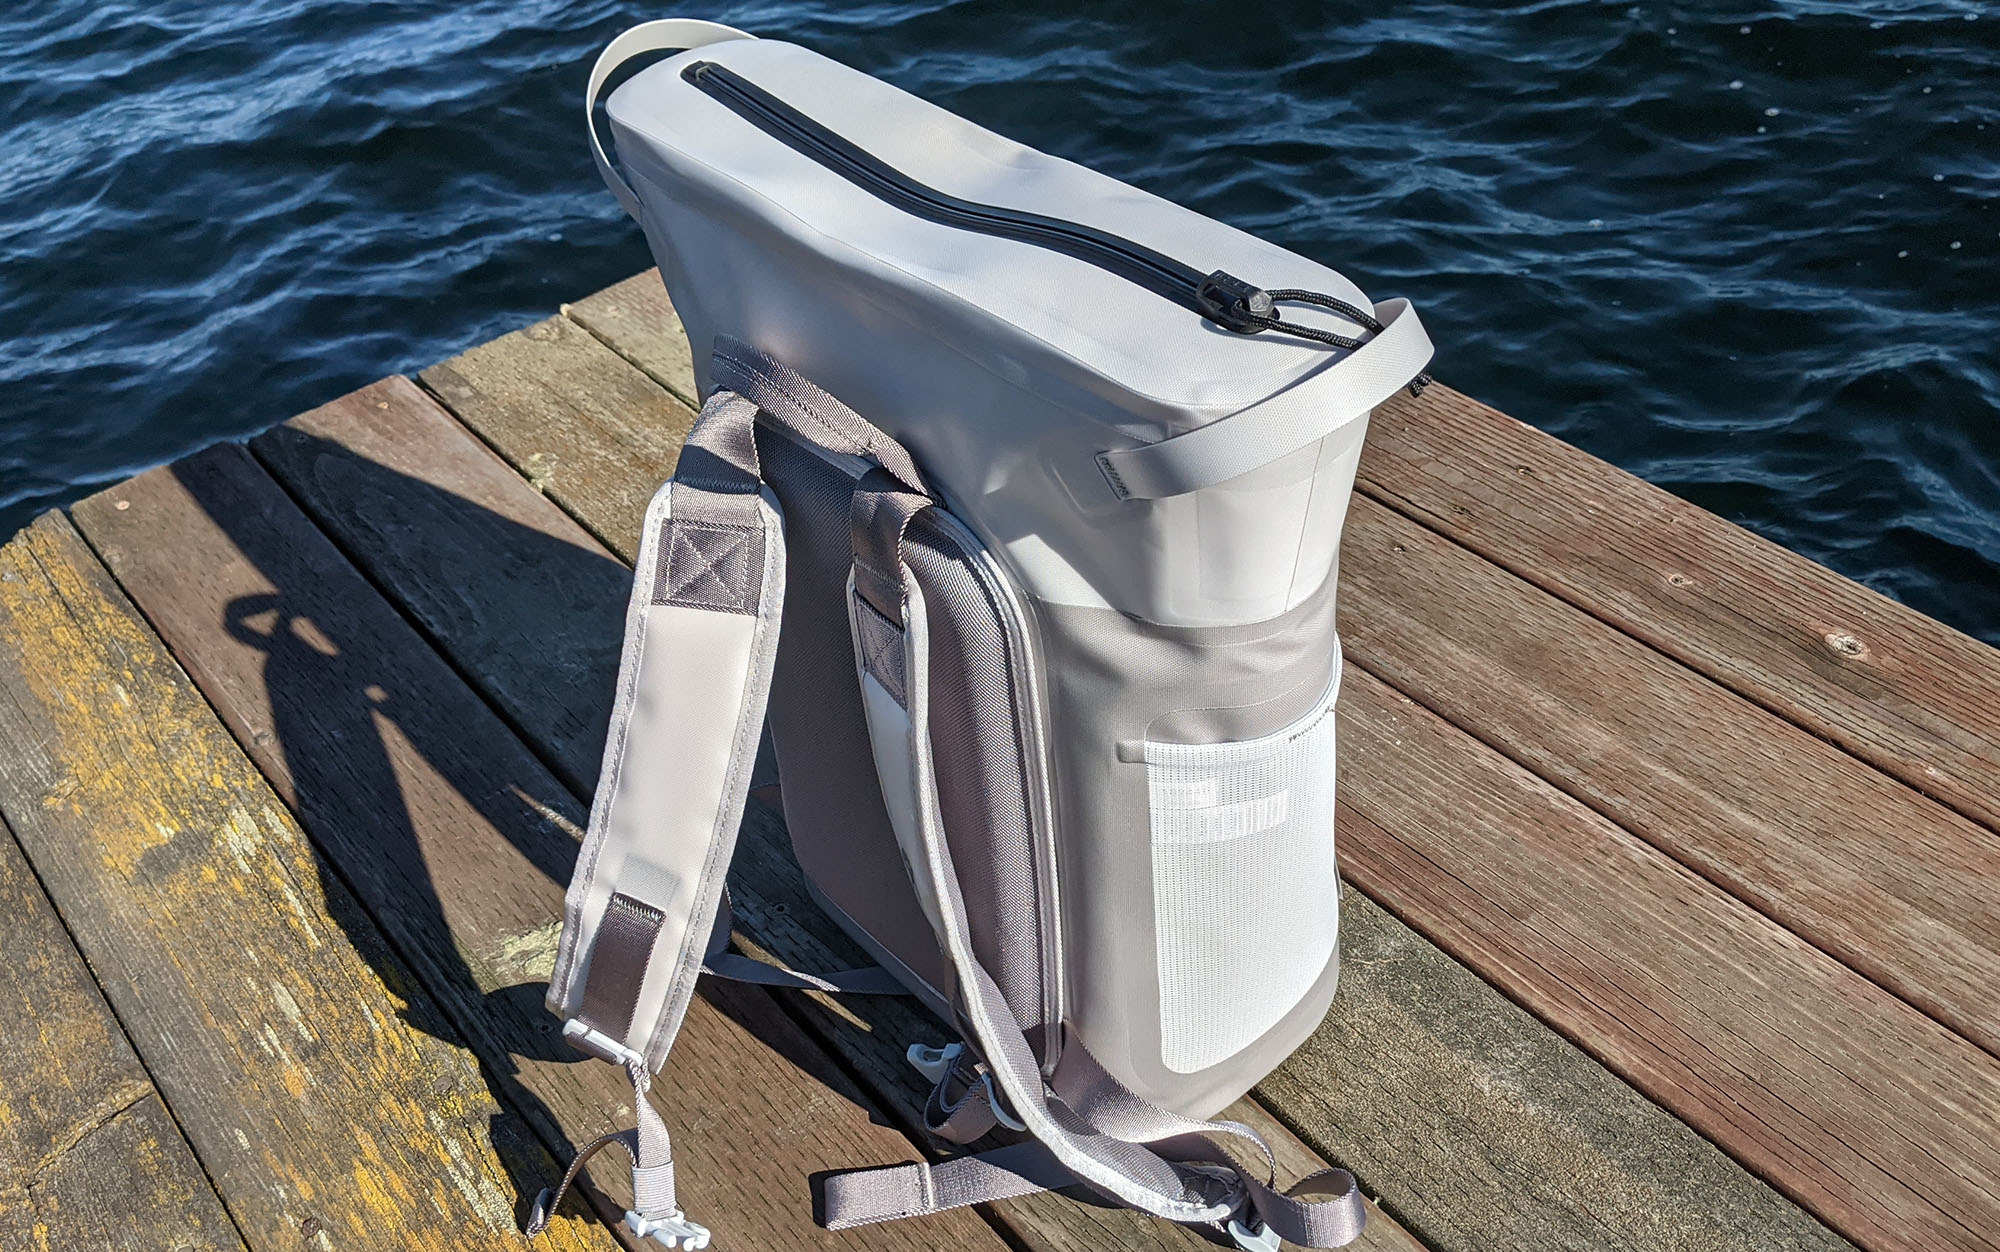 The extra padding and wide frame made the Hydroflask Day Escape the most comfortable backpack cooler to carry.